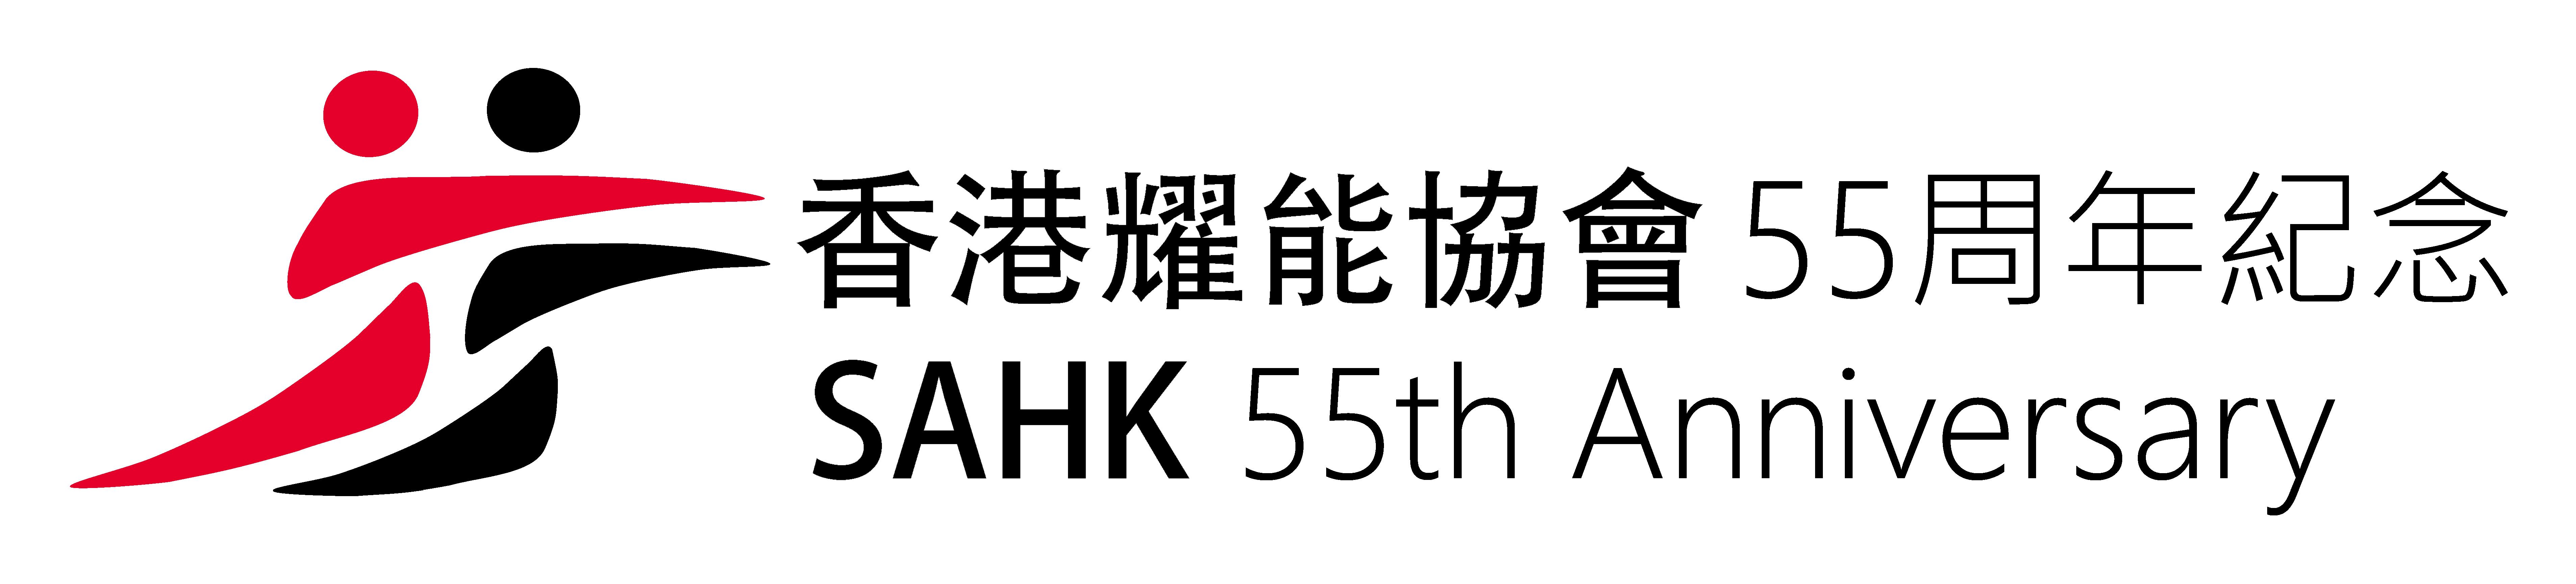 Click for more information on the SAHK 55th Anniversary logo